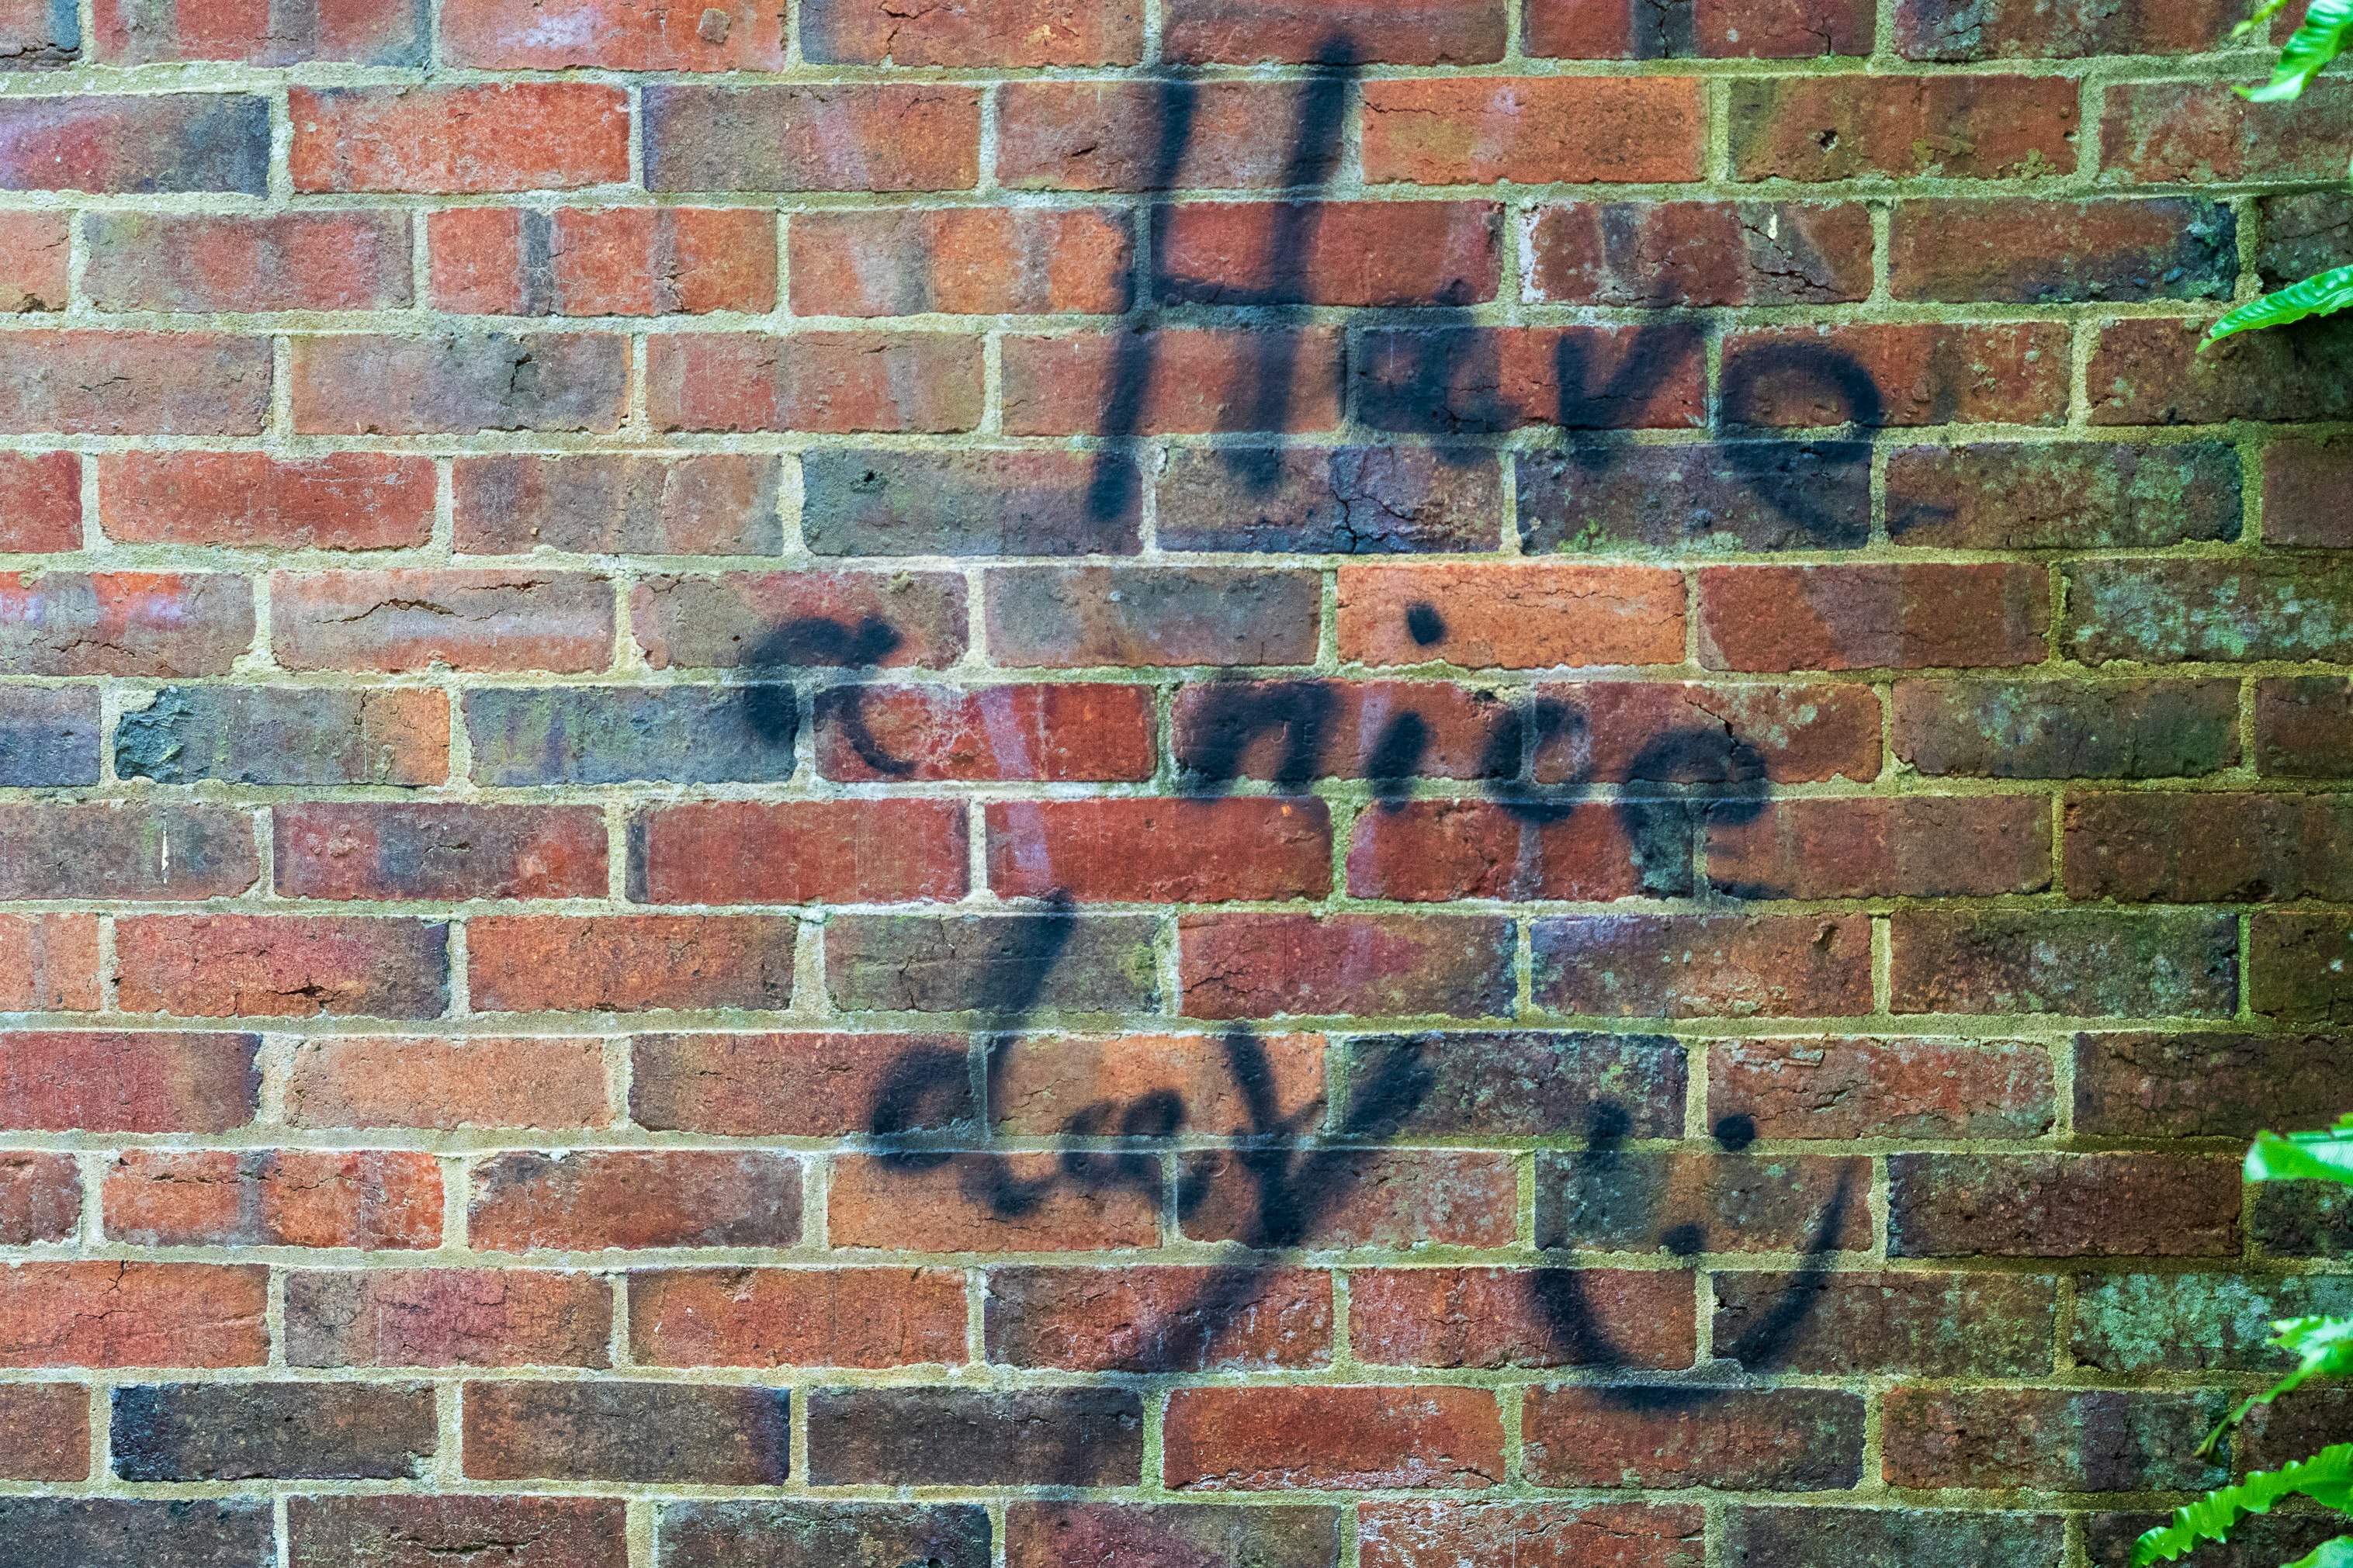 Have a nice day, spray painted on the red brick wall of an old mill building.